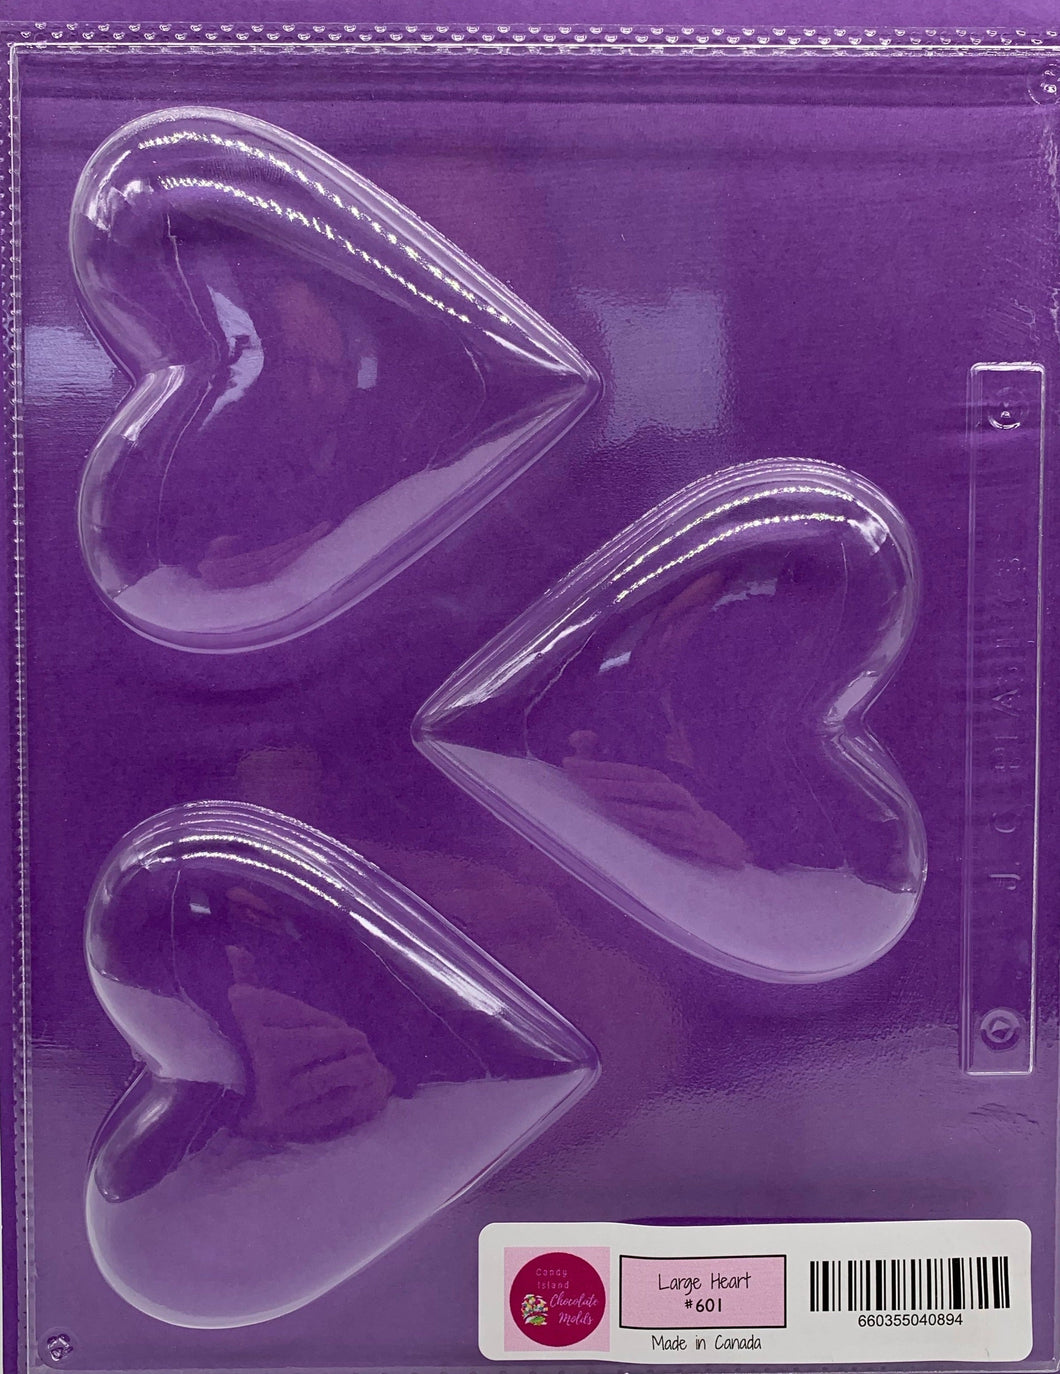 Candy Island Chocolate Mold #601 - Large Heart